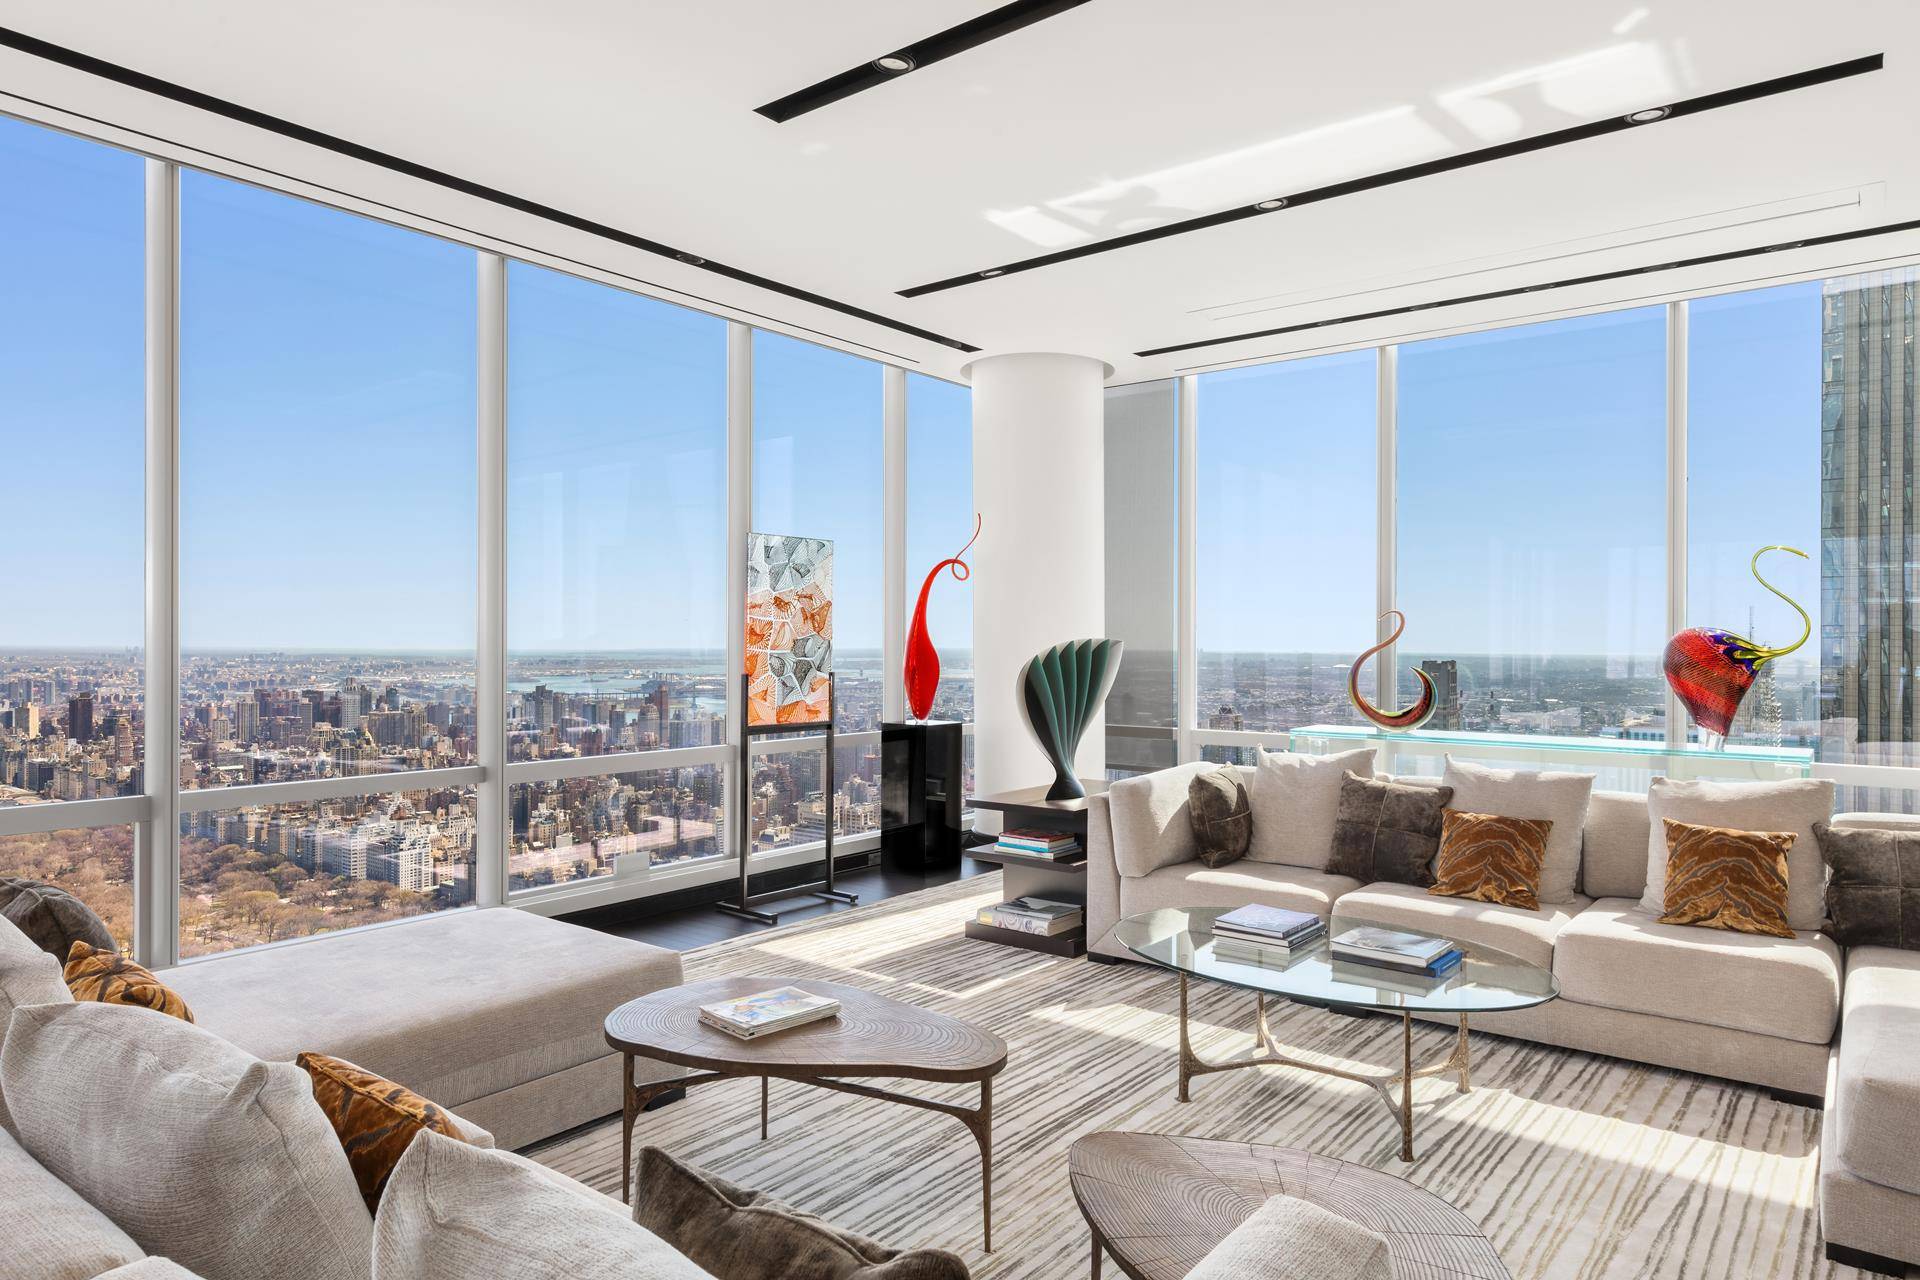 Soaring high above Midtown, comprising the entire 81st floor, this trophy penthouse residence at the premier One57 condominium tower is a masterpiece of design and luxury.